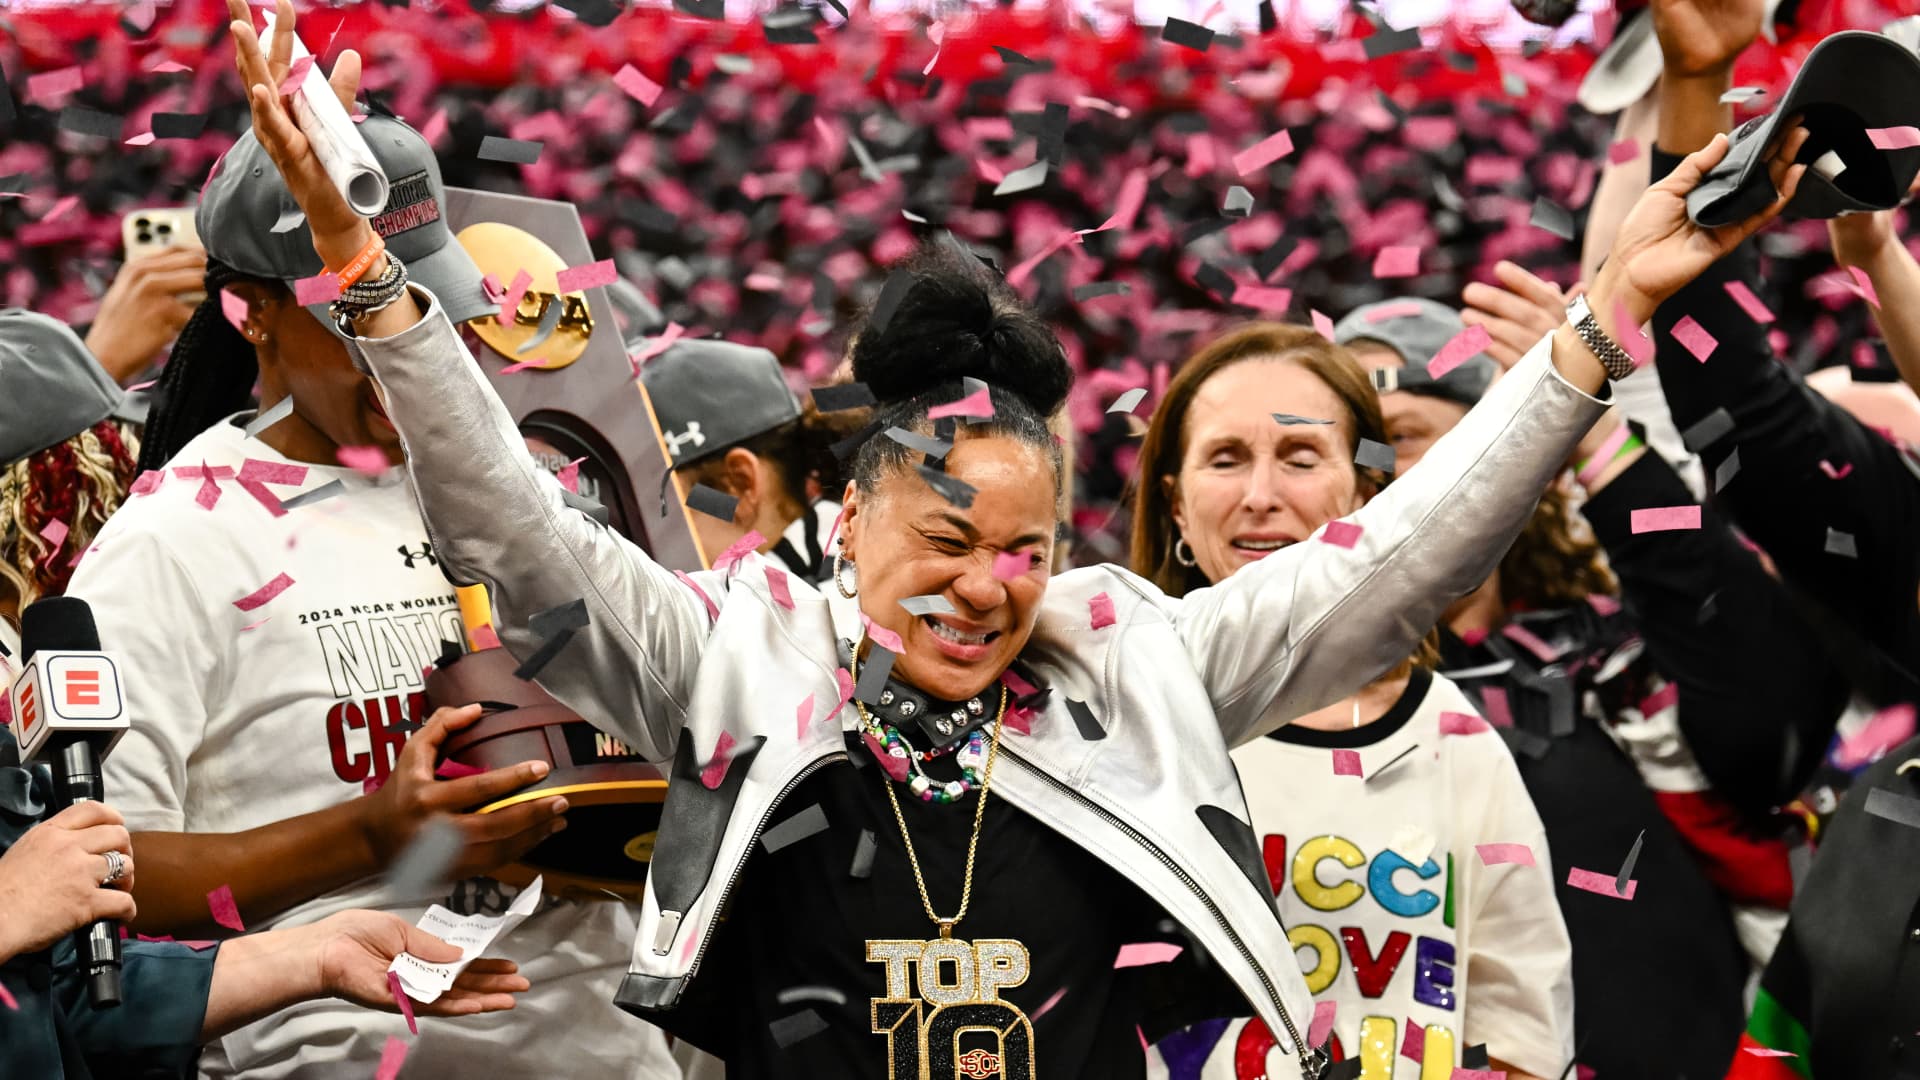 South Carolina coach Dawn Staley calls for women’s sports investment [Video]